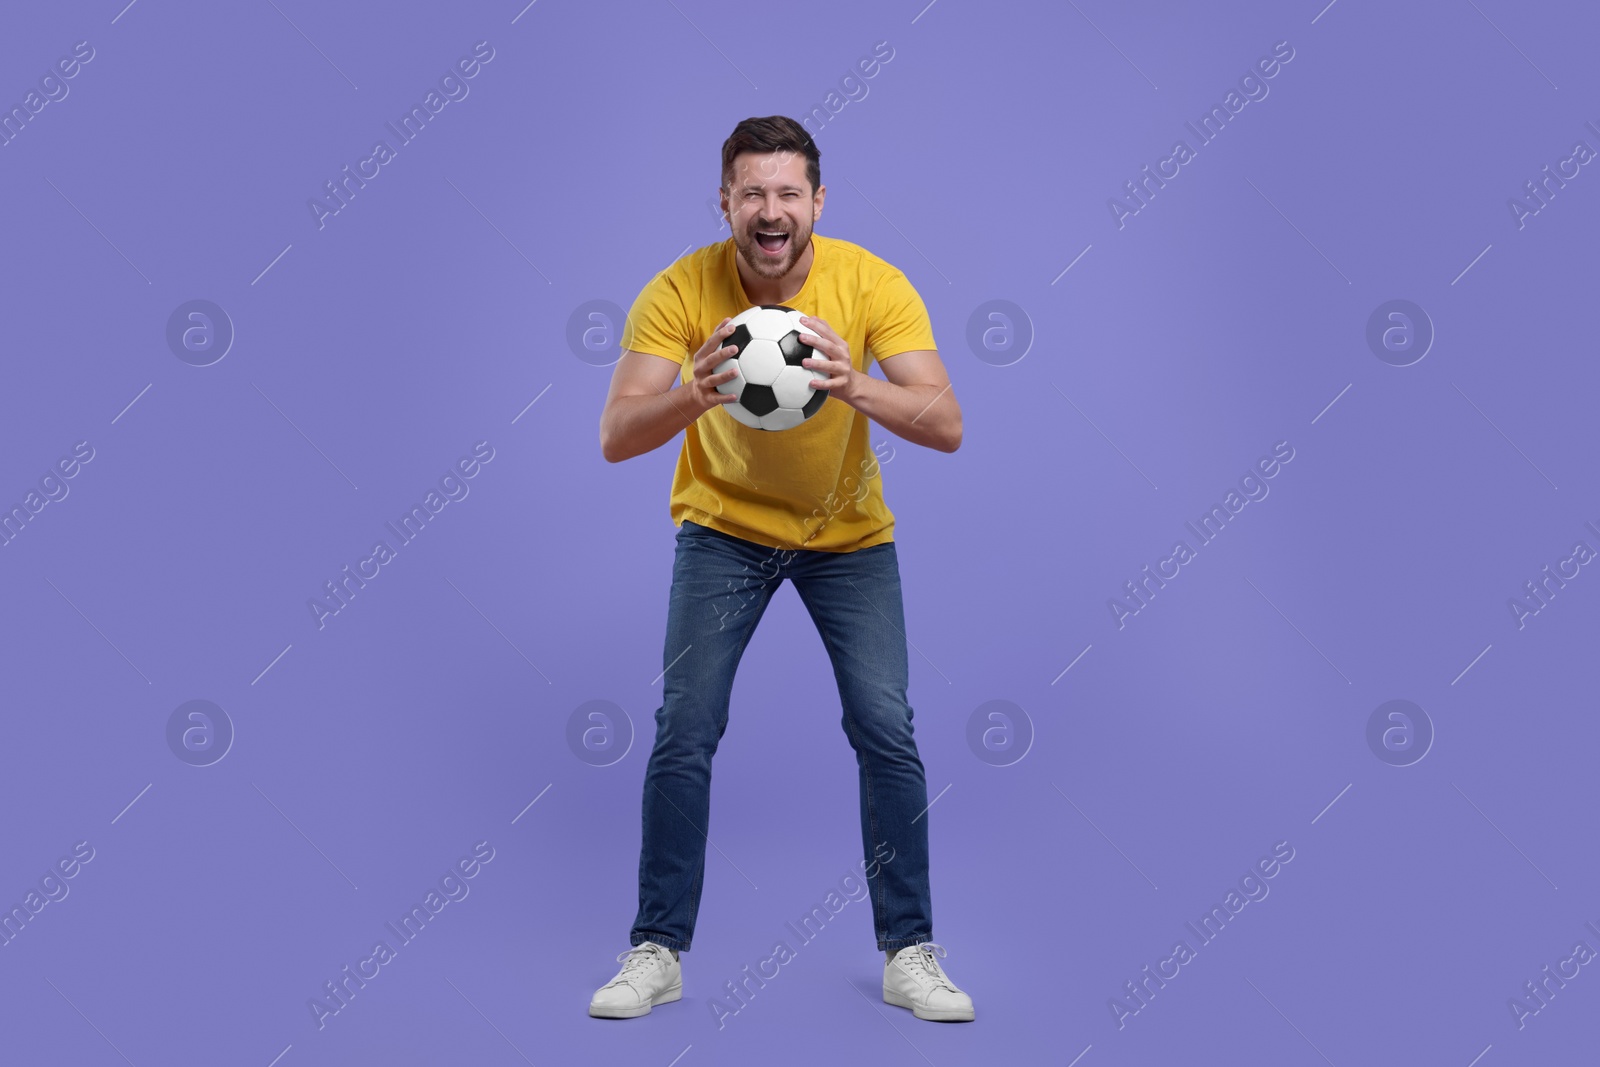 Photo of Emotional sports fan with ball on purple background